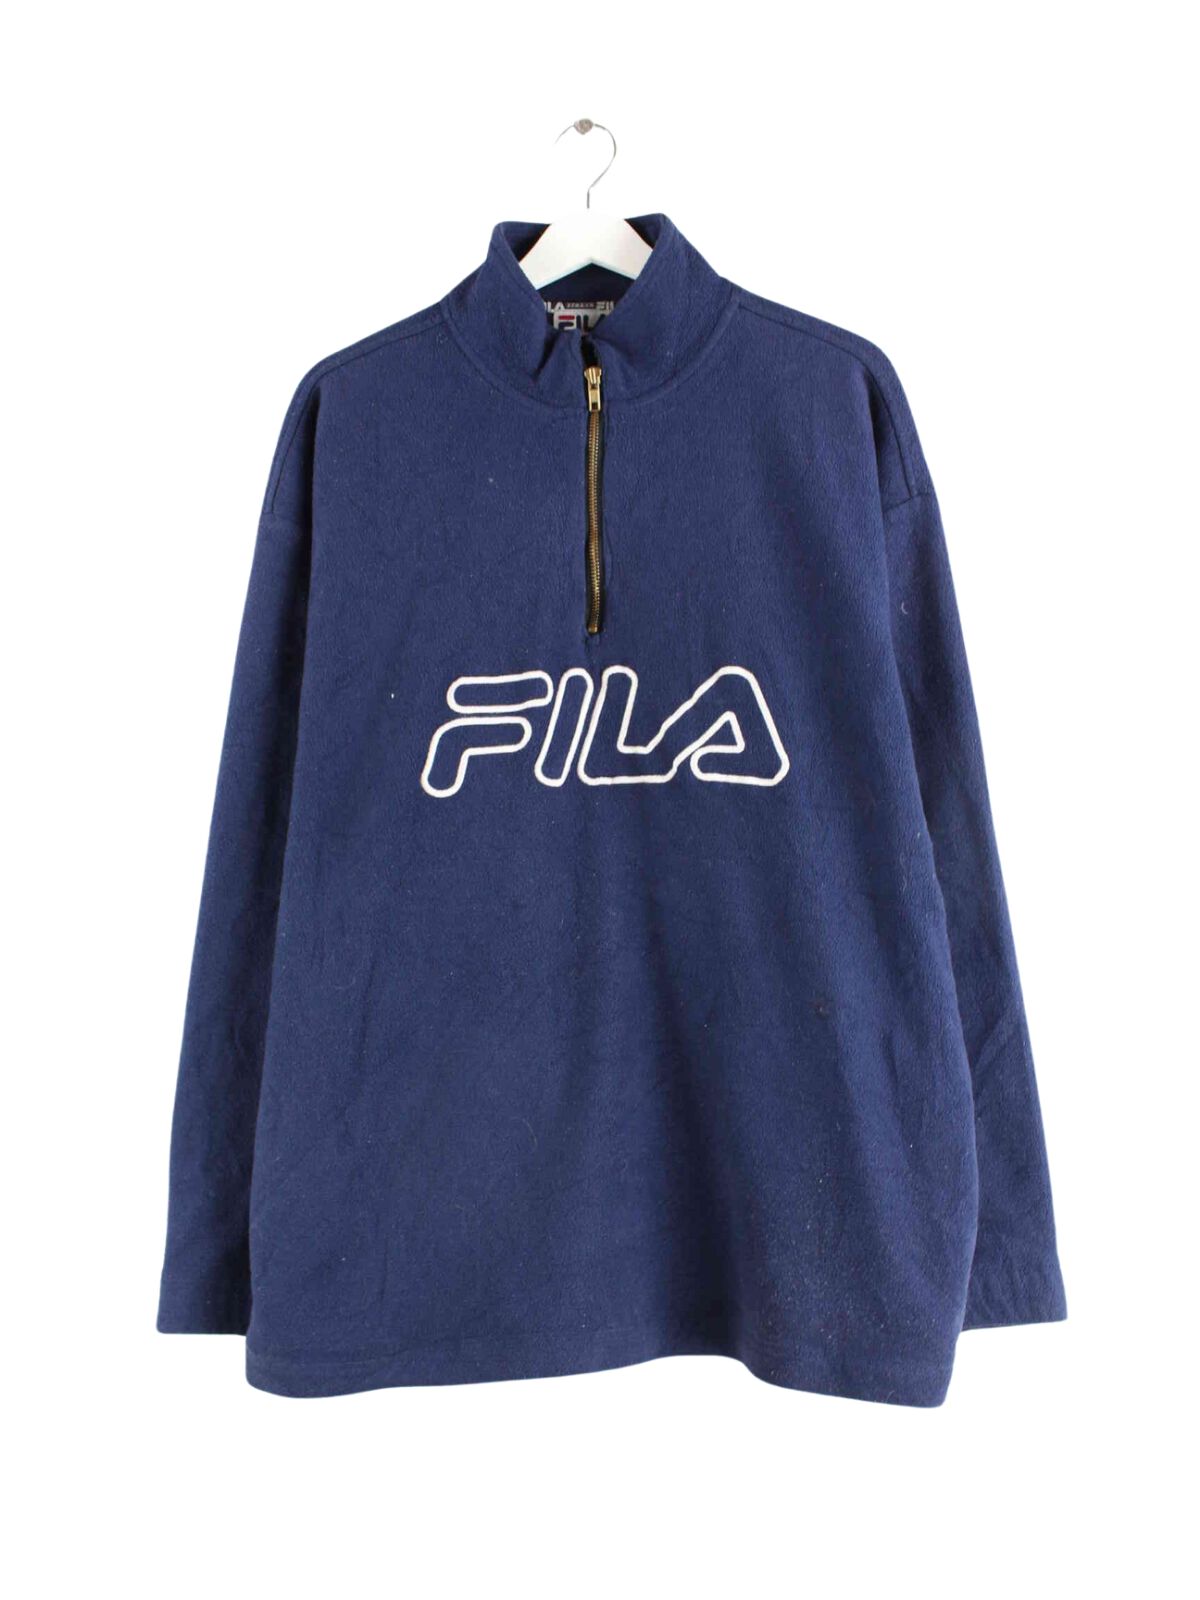 Fay 90s Vintage Embroidered Fleece Half Zip Sweater Blau L (front image)